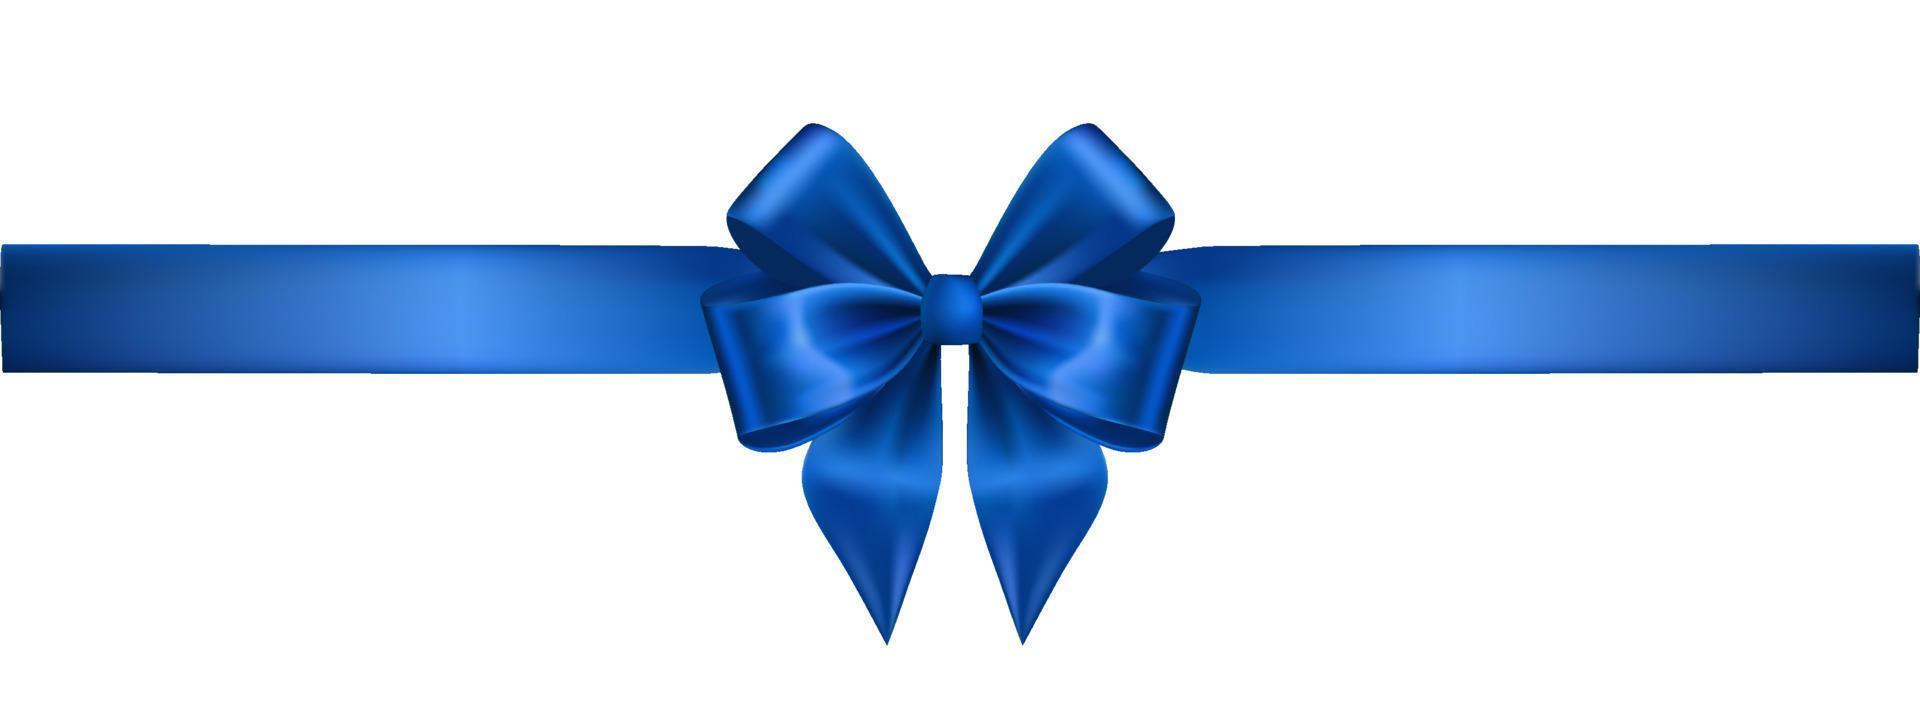 Blue Silk Realistic Bow with Ribbon on White vector